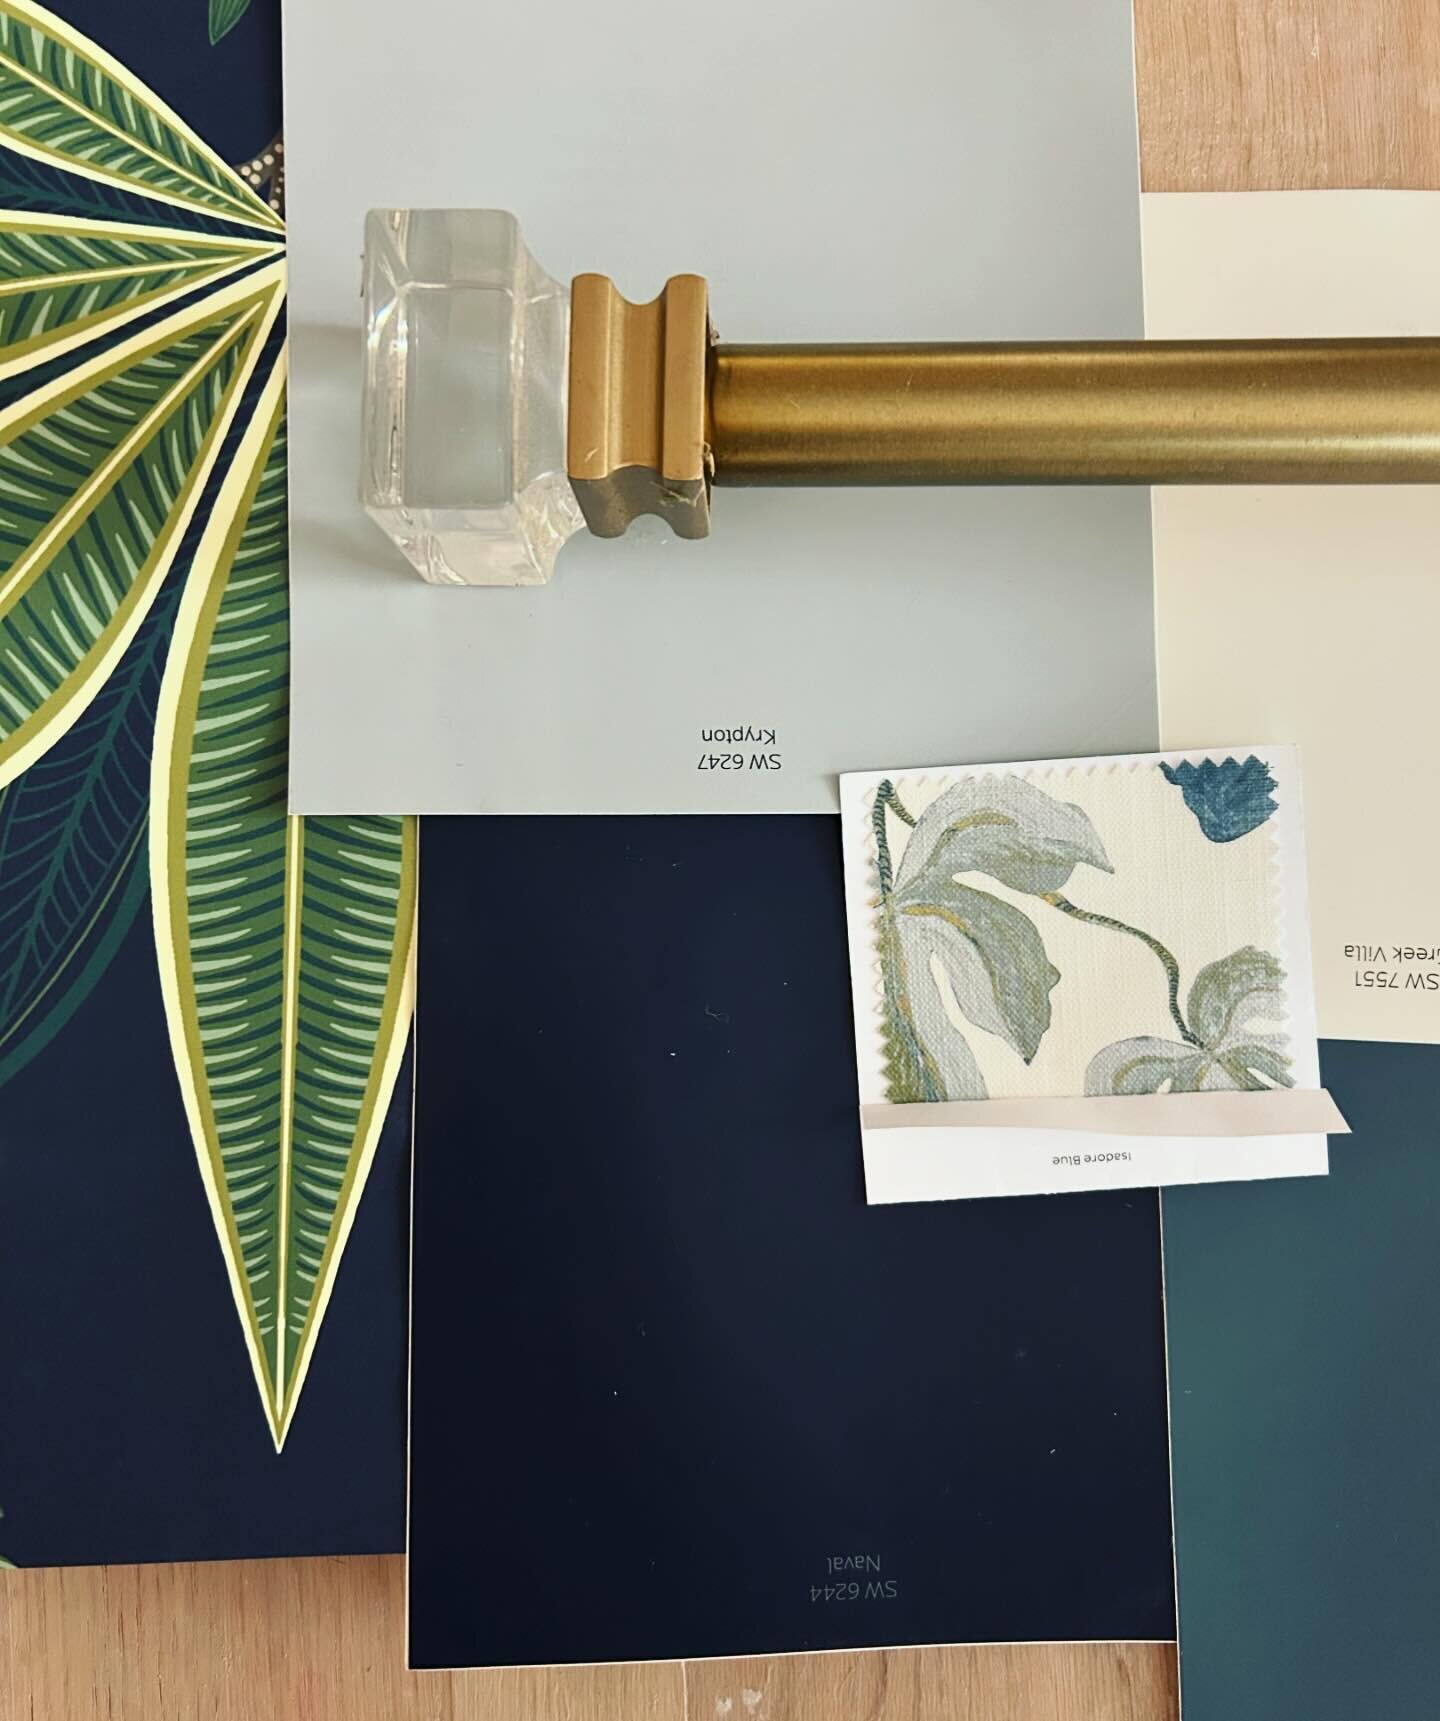 Vibe check! Finally getting to some of the fun details of a renovation project! Working on making sure that adjacent rooms are cohesive, flow, and highlight our favorite accents!